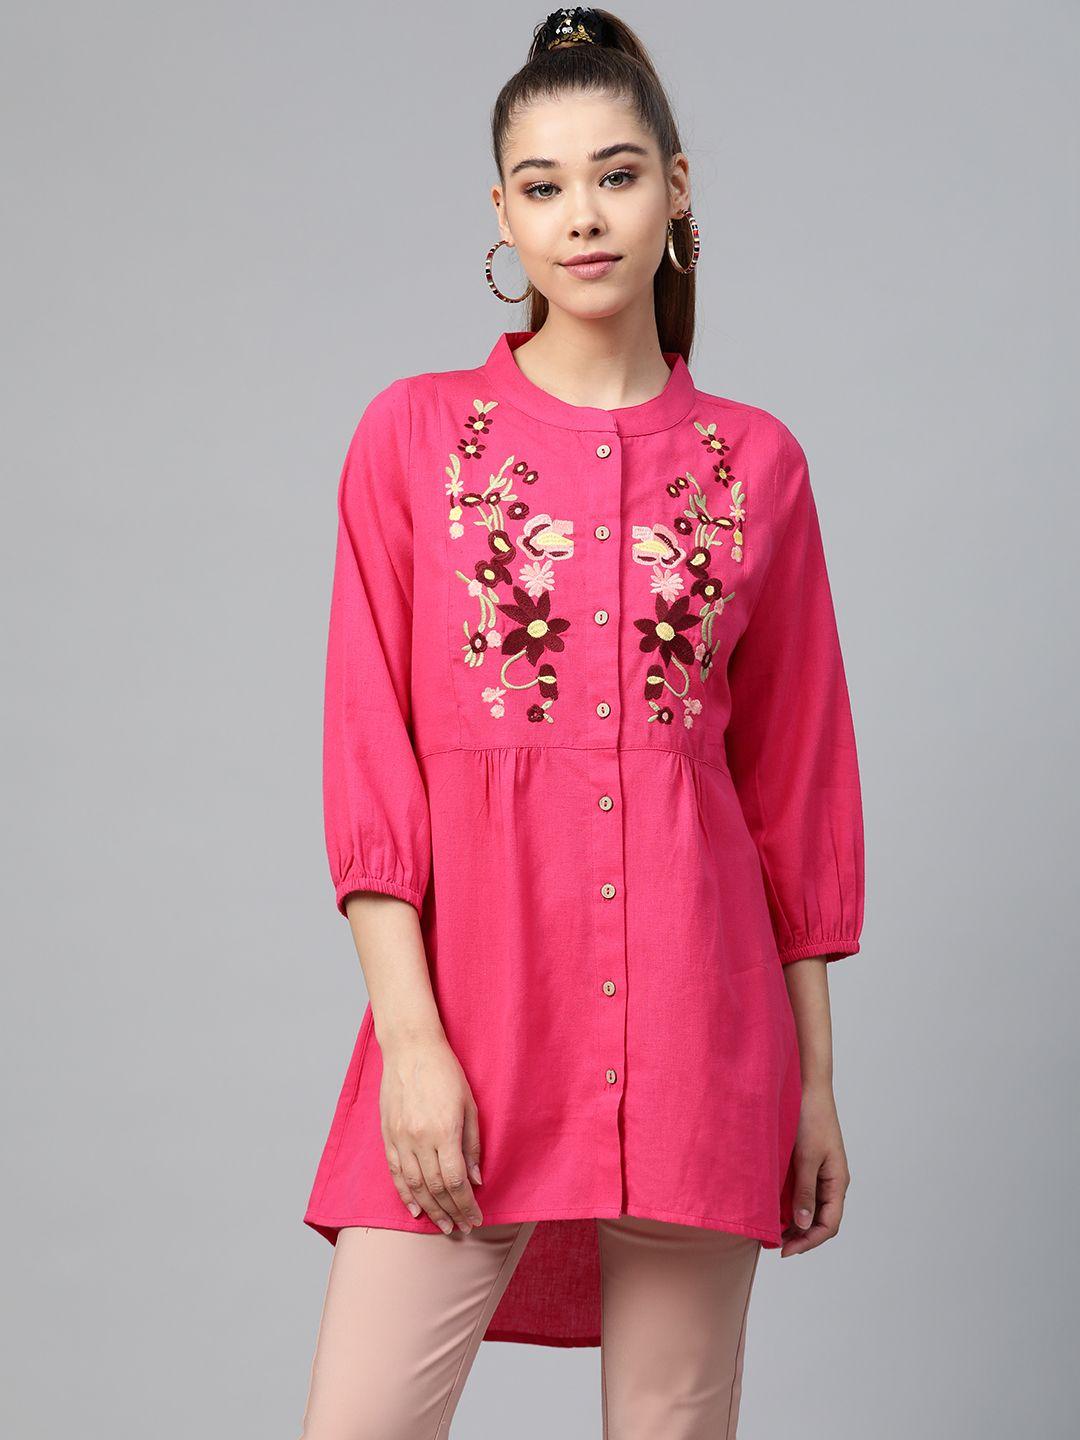 shae by sassafras women pink embroidered high-low tunic